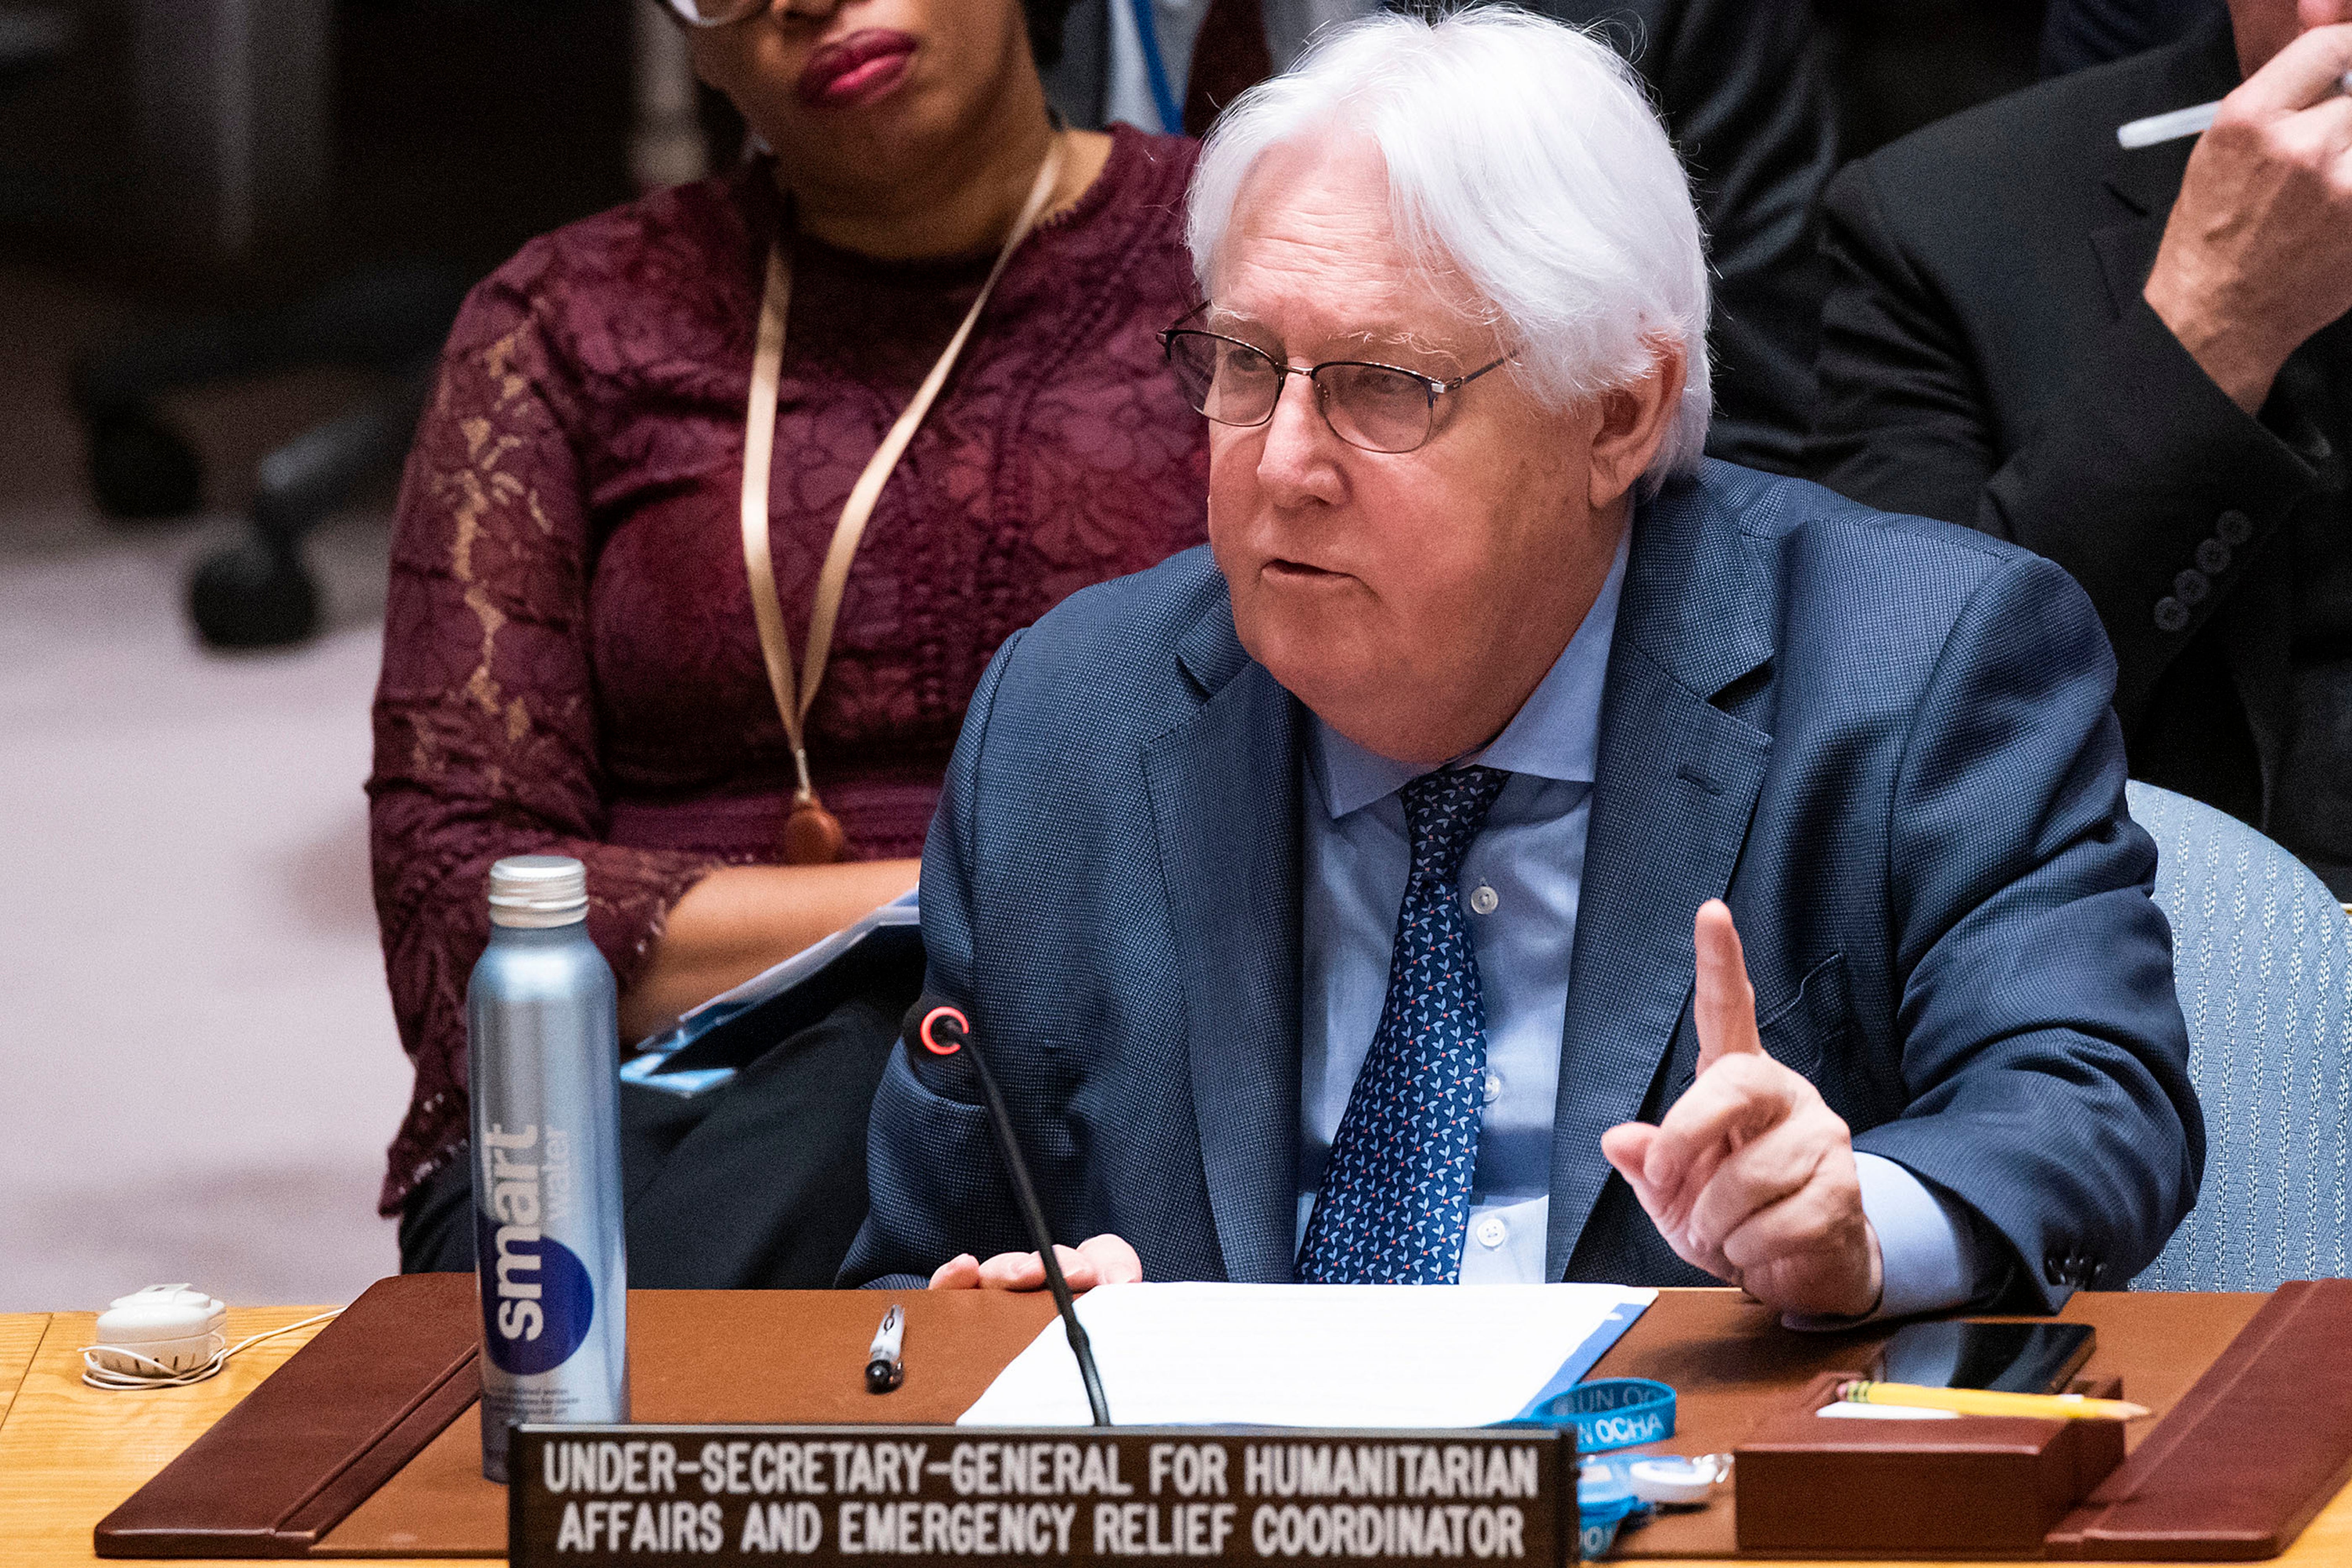 Under-Secretary-General for Humanitarian Affairs and Emergency Relief Coordinator Martin Griffiths